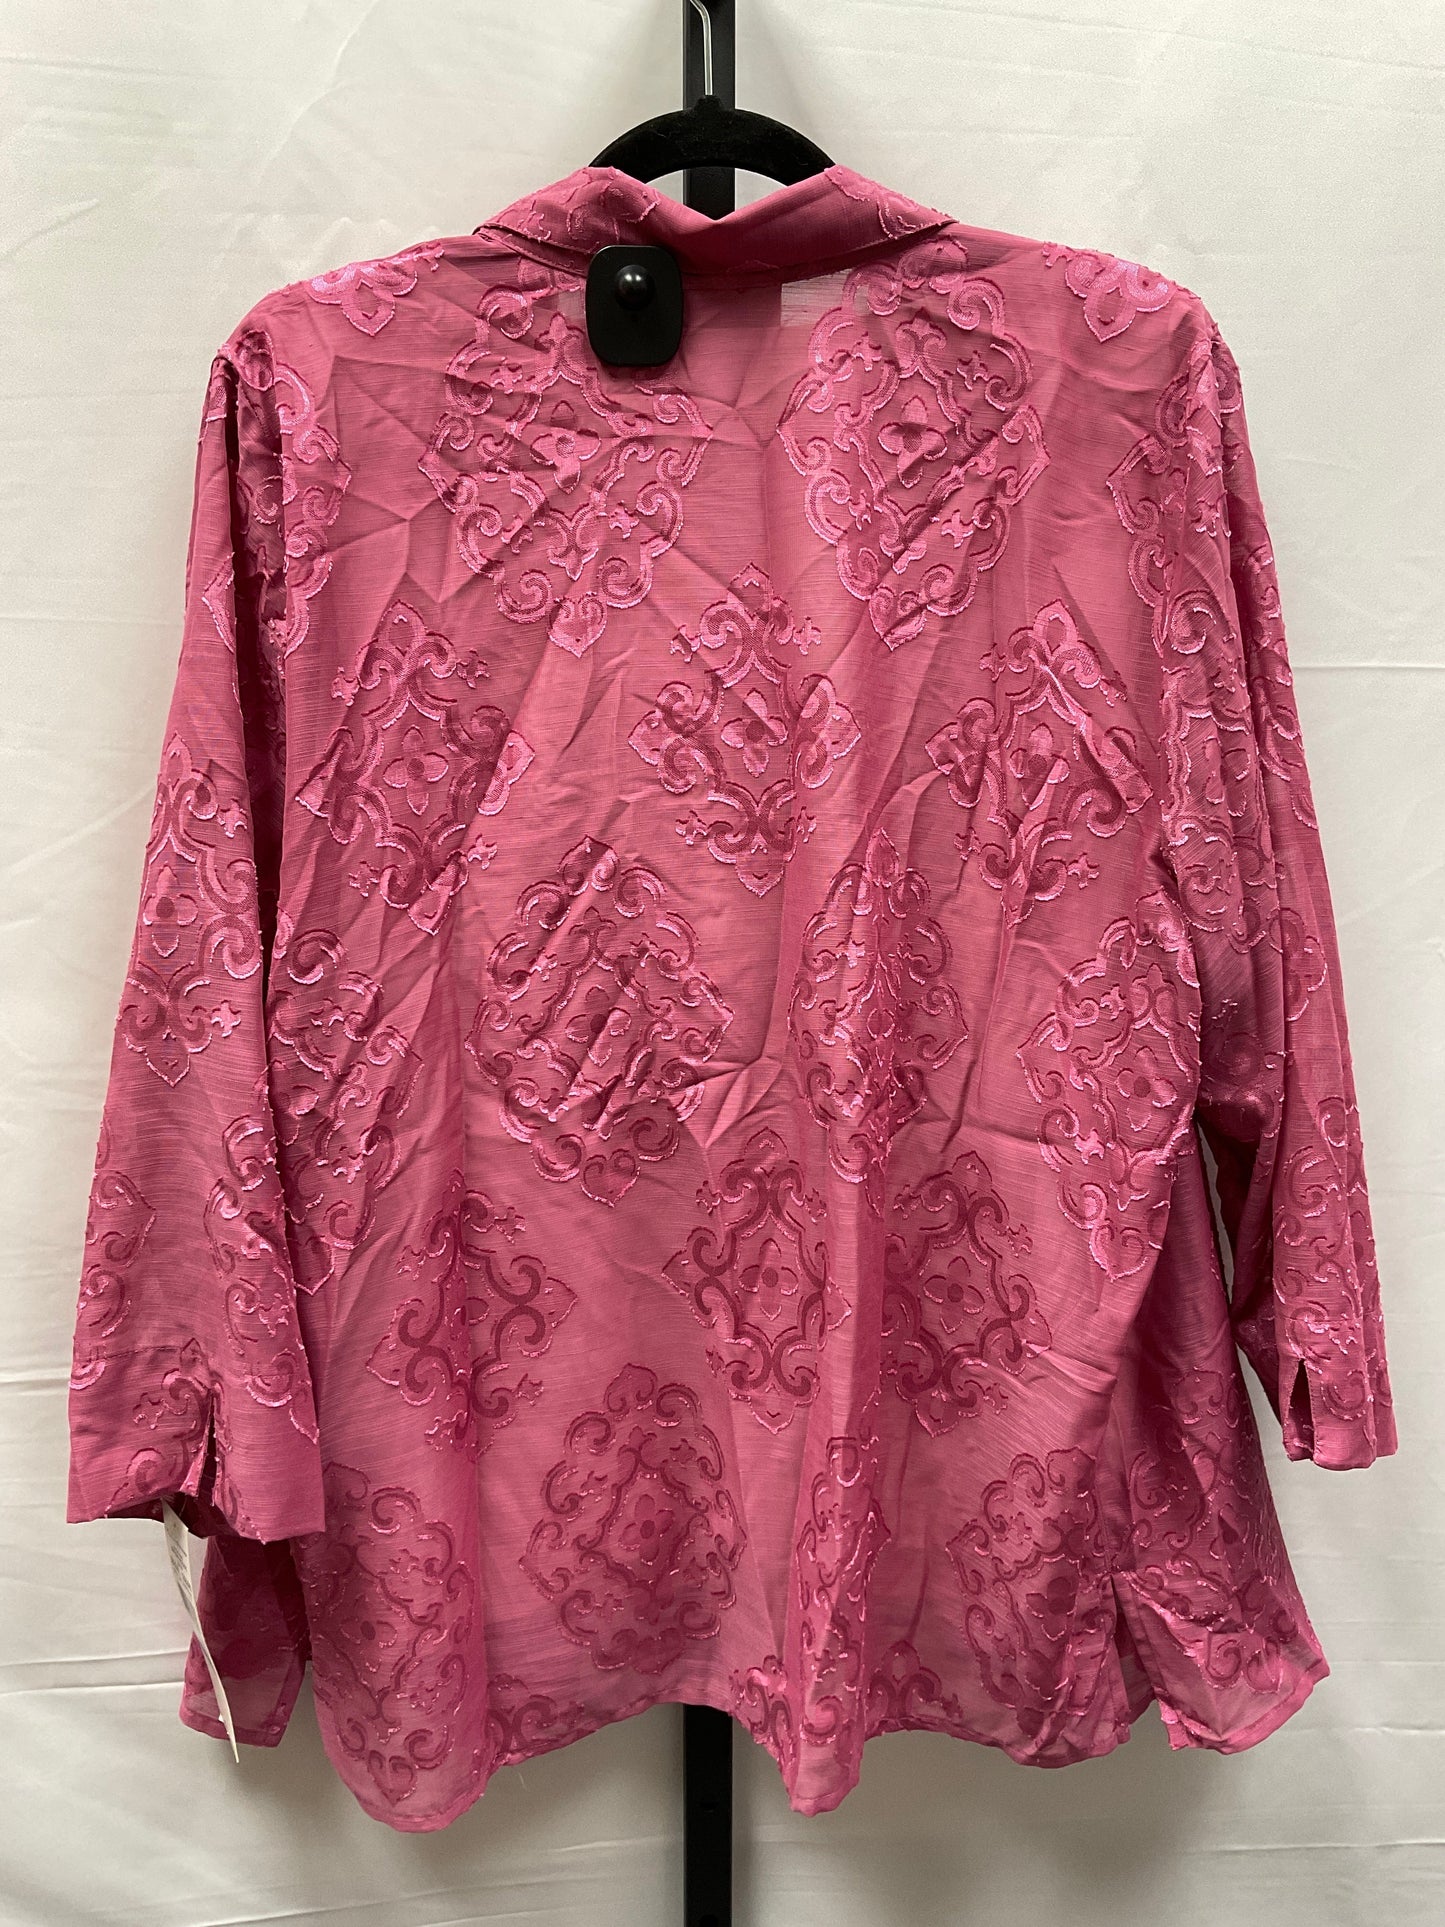 Pink & White Top Long Sleeve Alfred Dunner, Size Xl